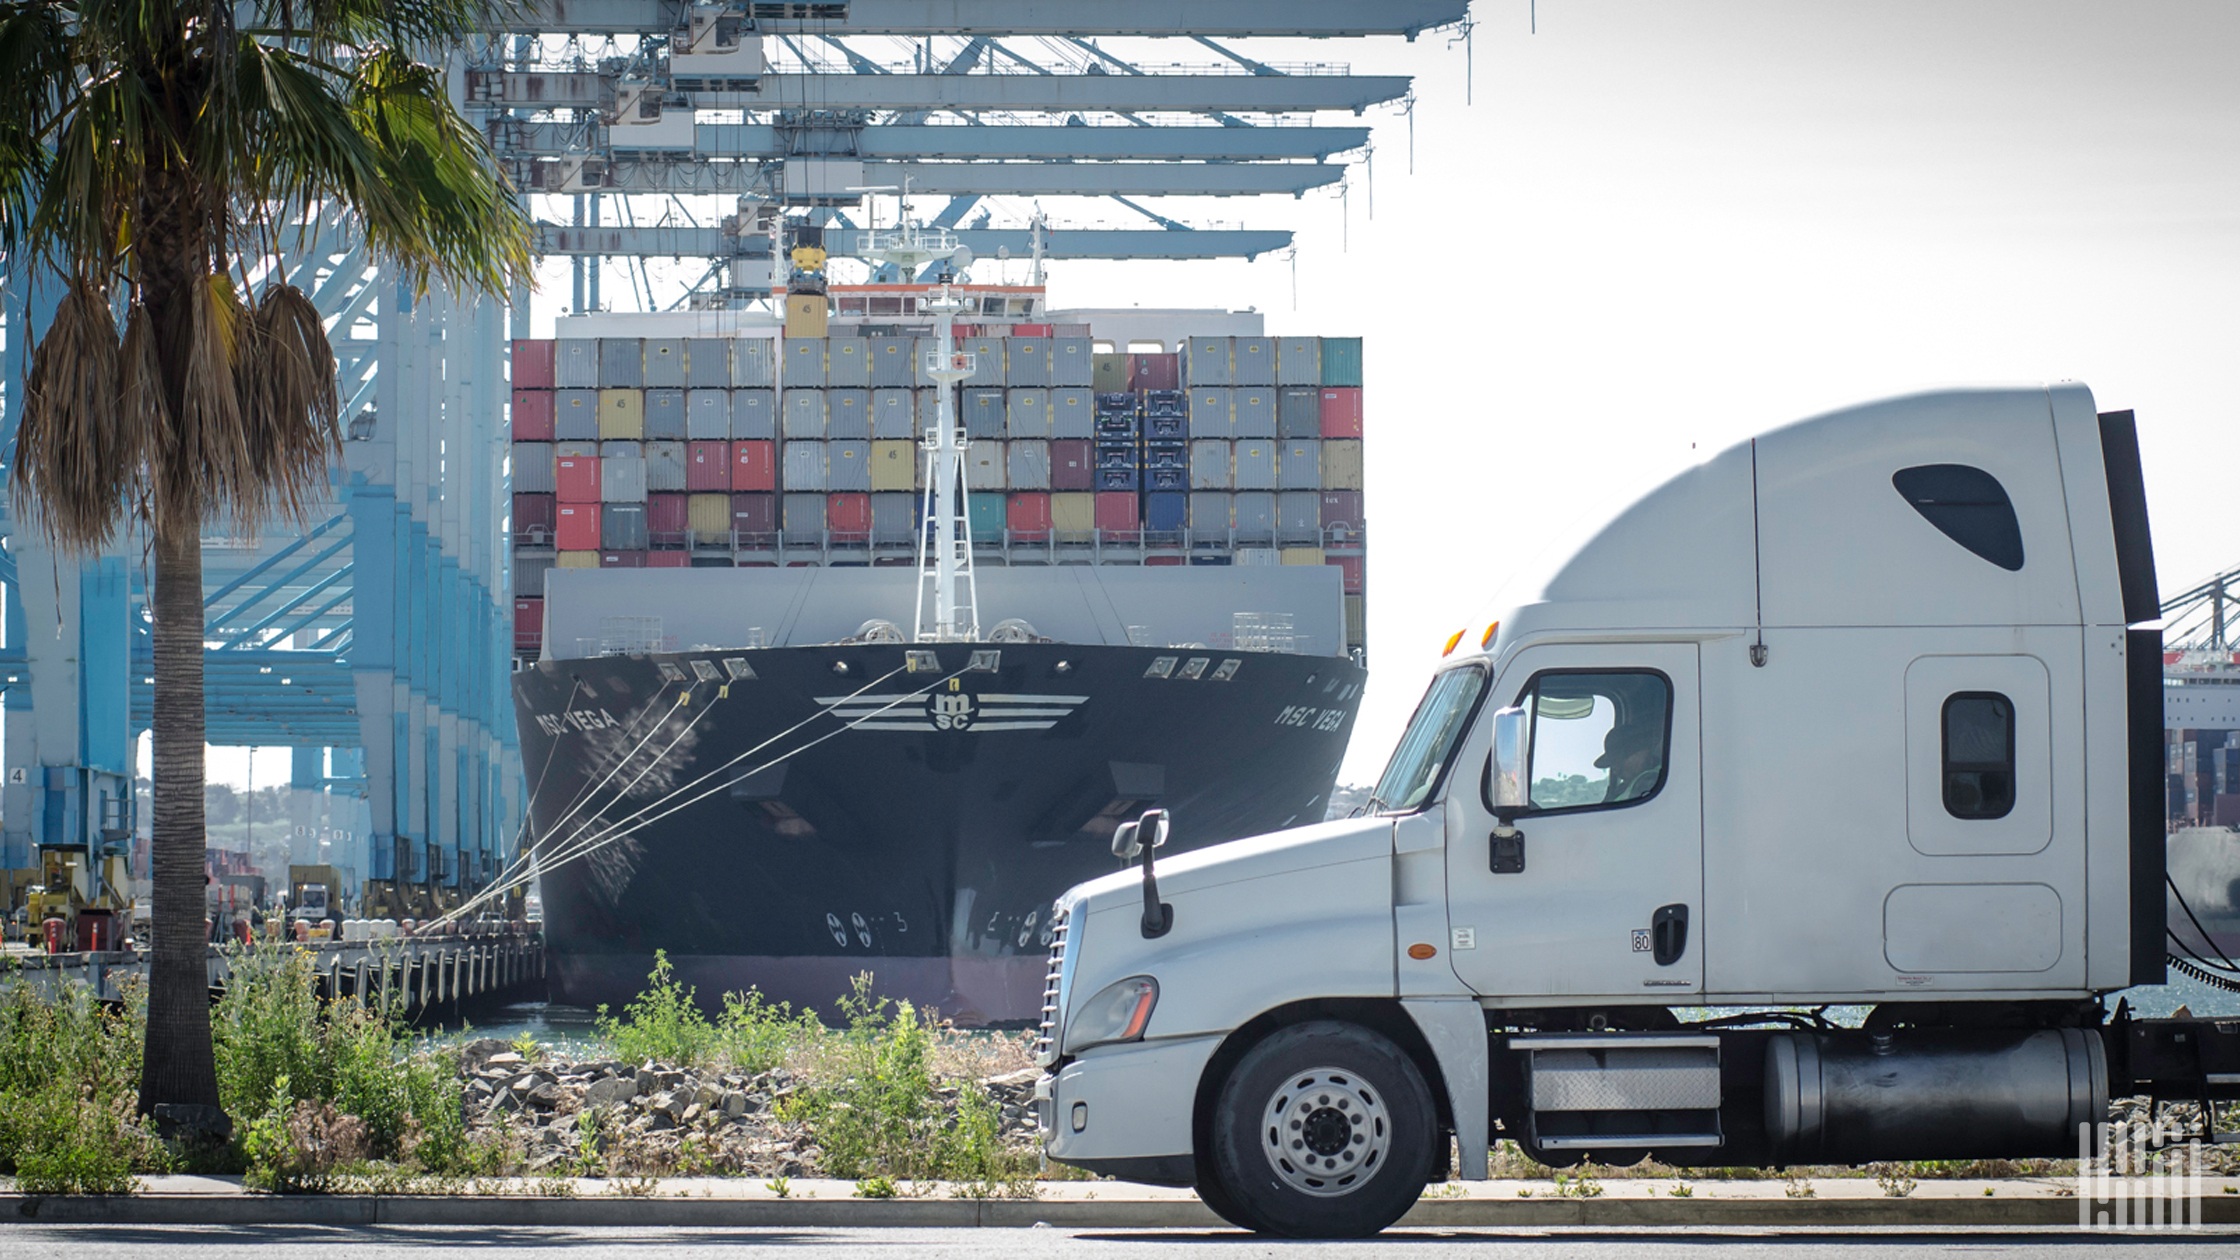 A drayage truck picking up cargo at the Port of Los Angeles. (Photo: Jim Allen/FreightWaves)